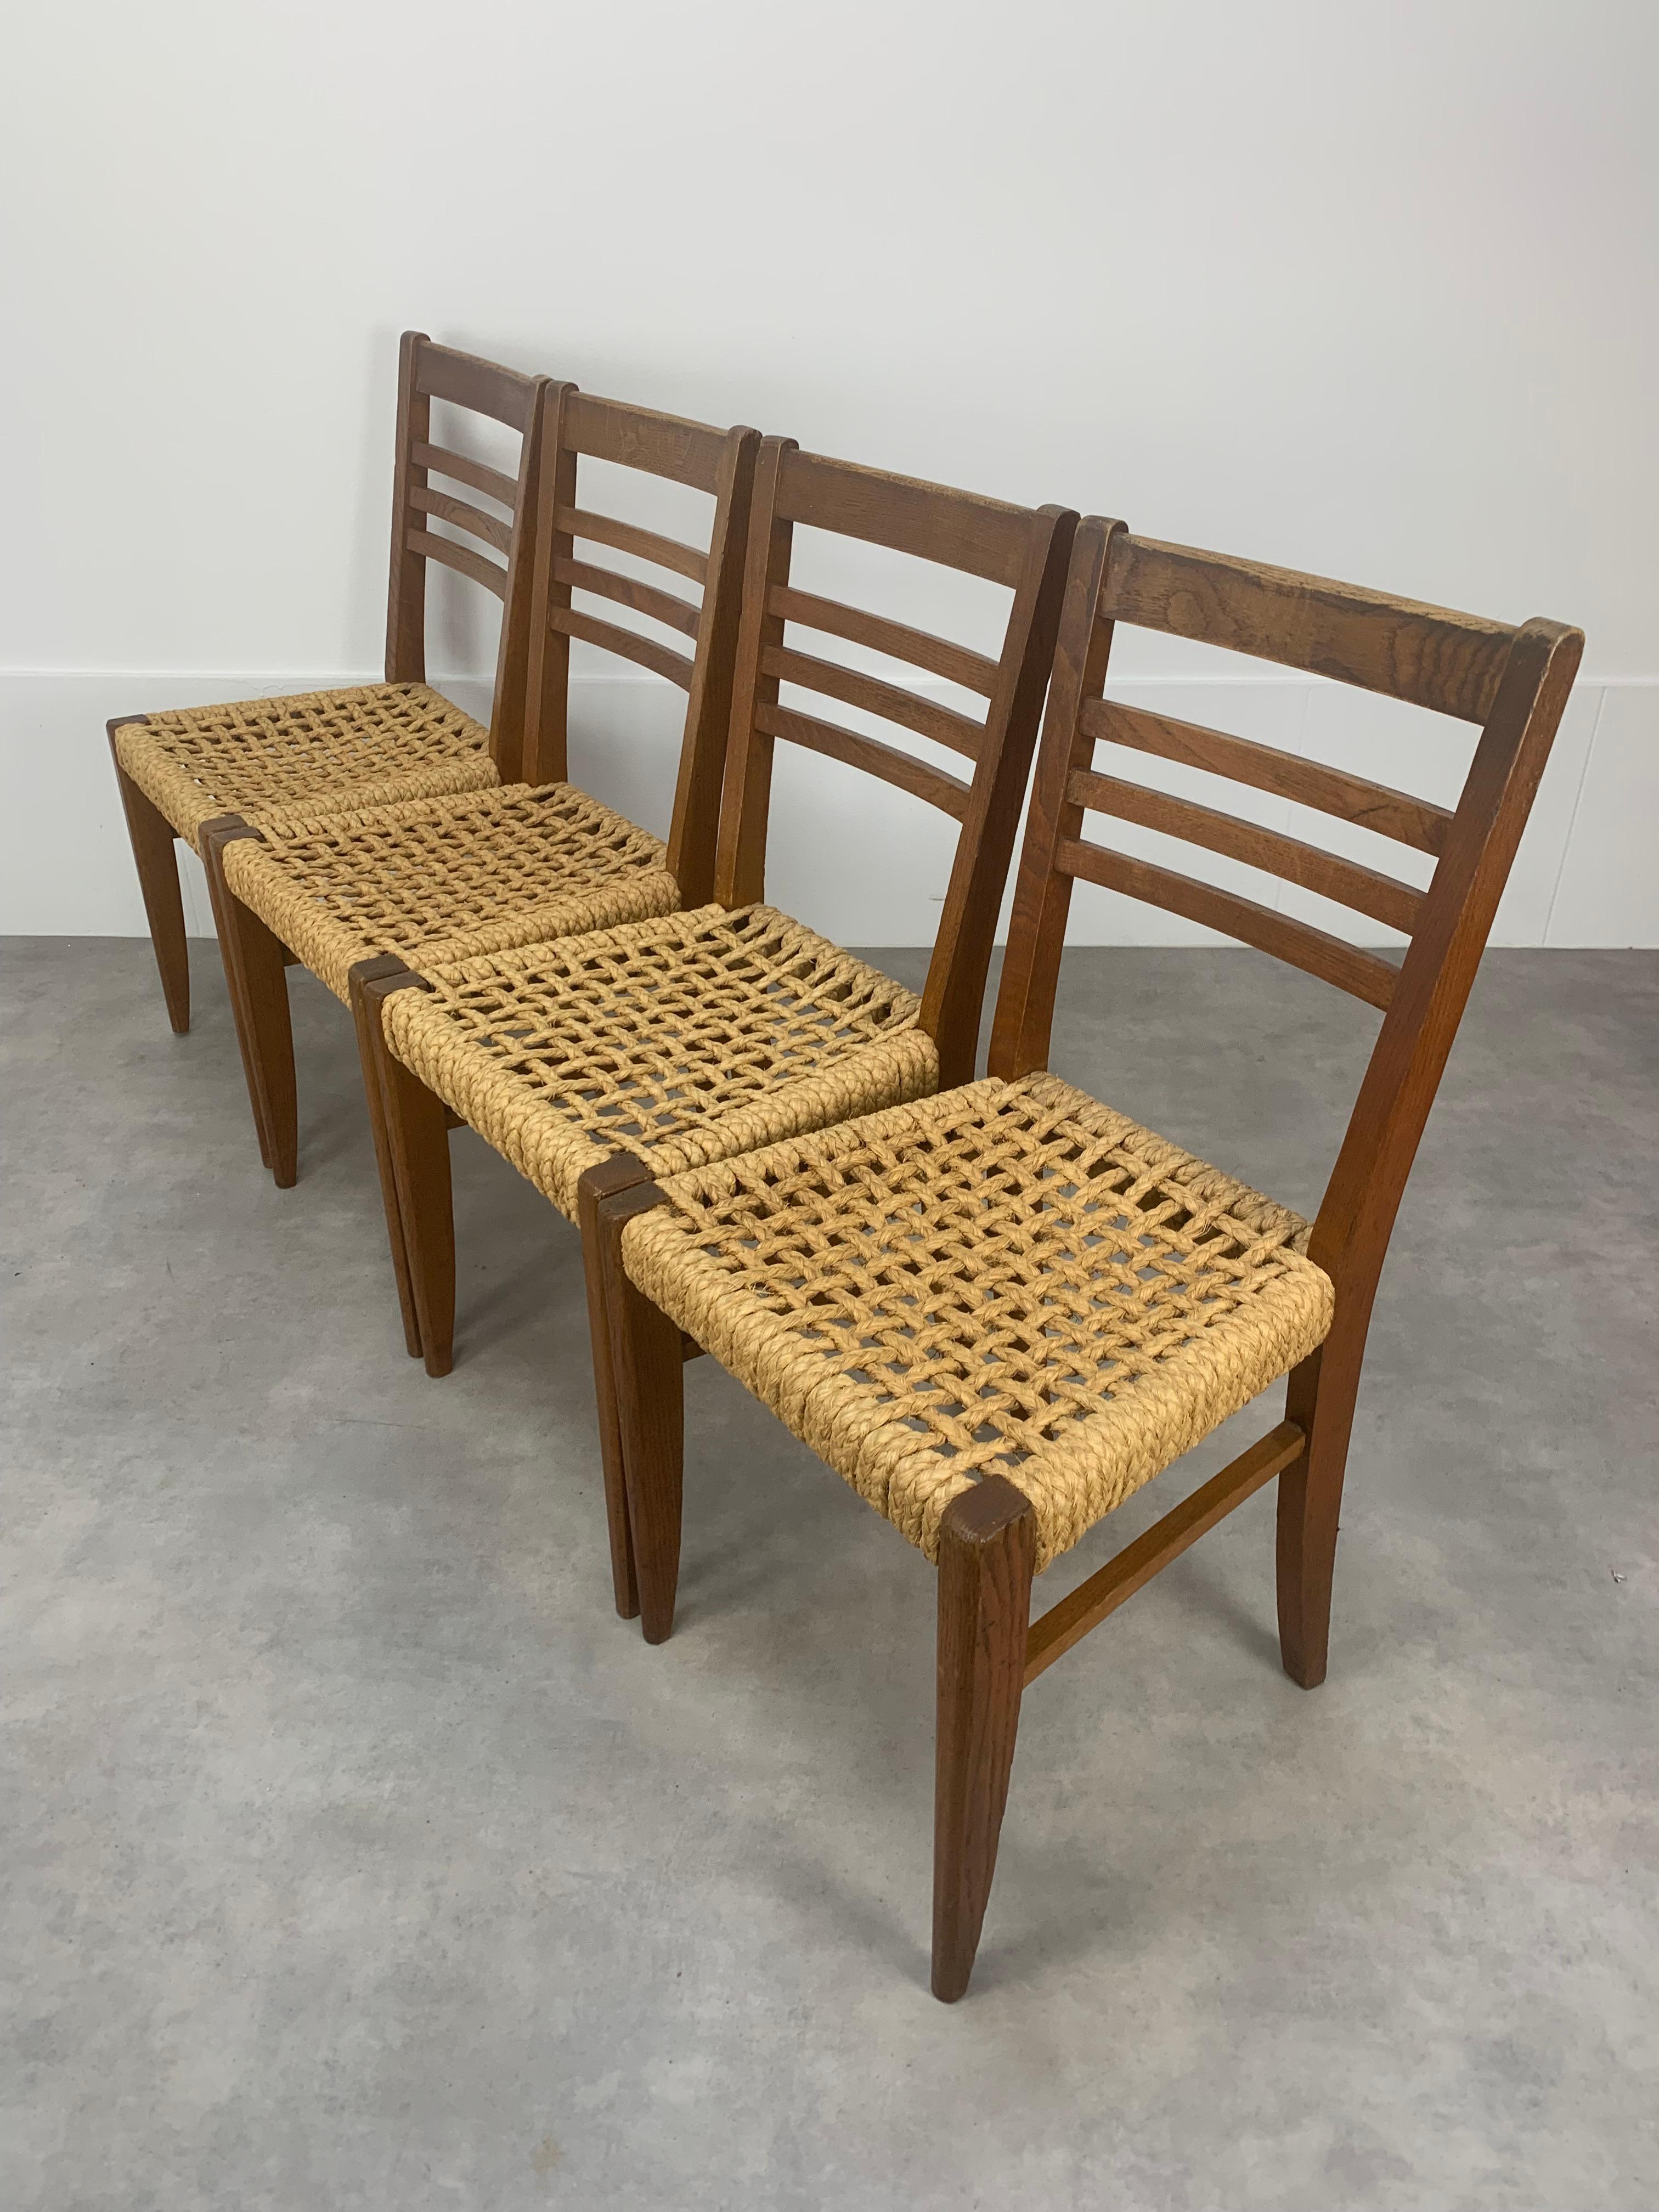 Set of four chairs by Adrien Audoux and Frida Minet for Vibo Vesoul. Very clean and stable. 